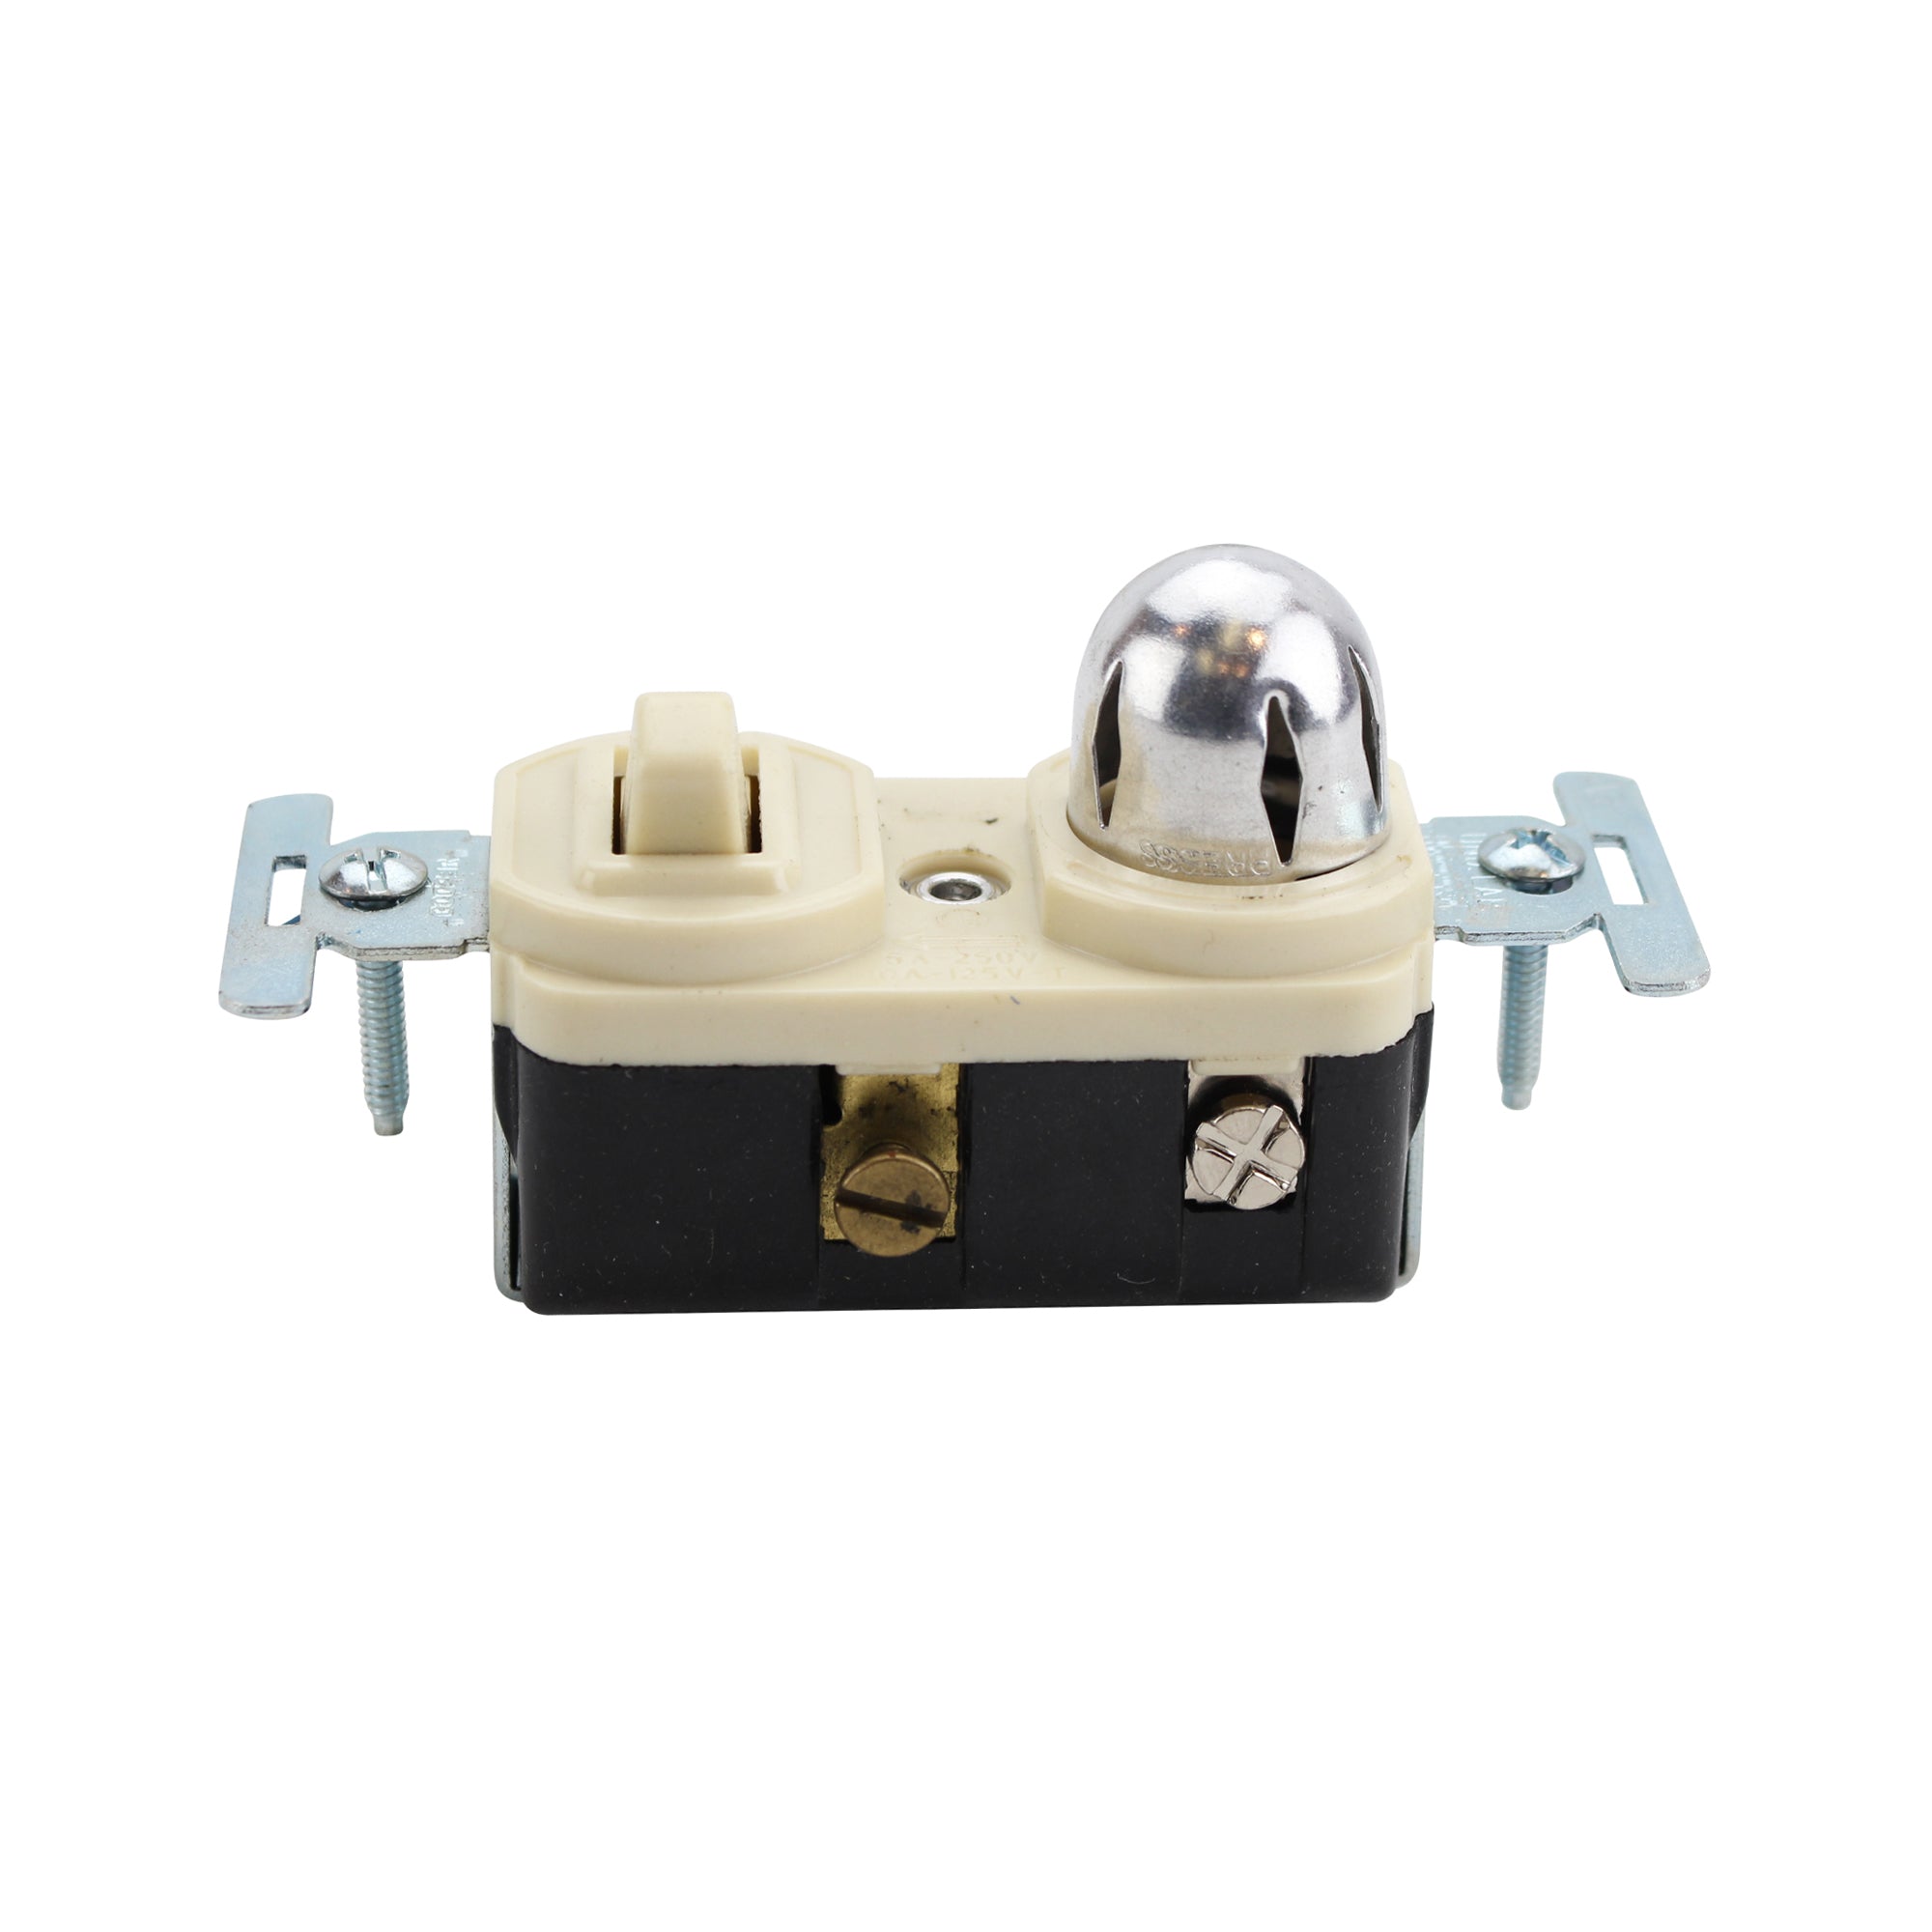 Cooper, COOPER WIRING 799V-BOX SINGLE POLE SWITCH AND PILOT LIGHT, IVORY